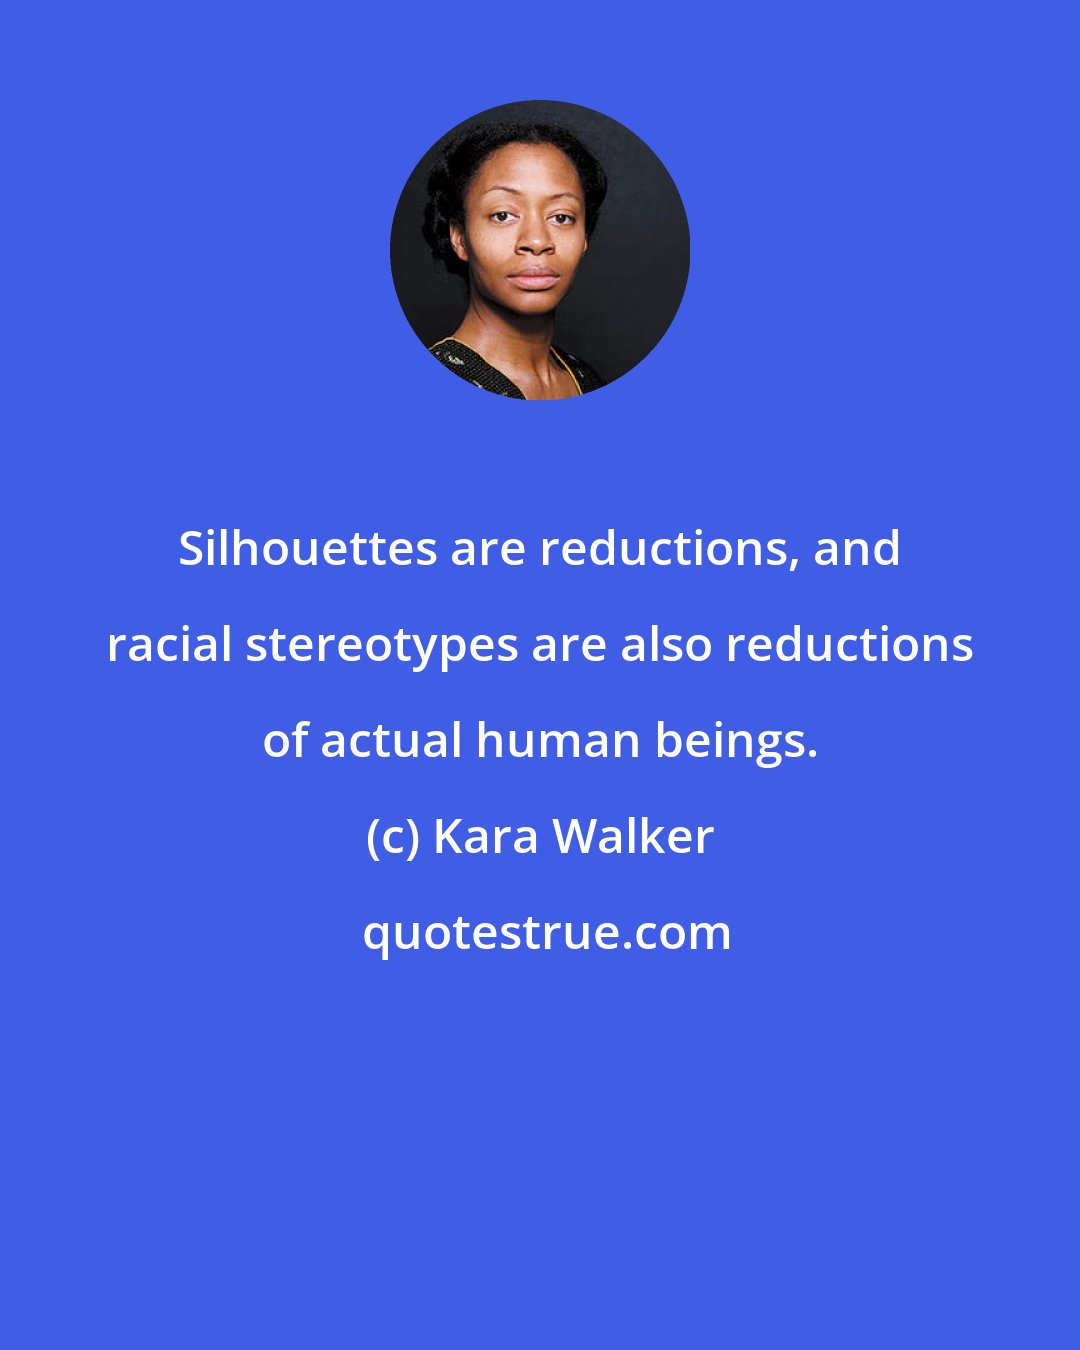 Kara Walker: Silhouettes are reductions, and racial stereotypes are also reductions of actual human beings.